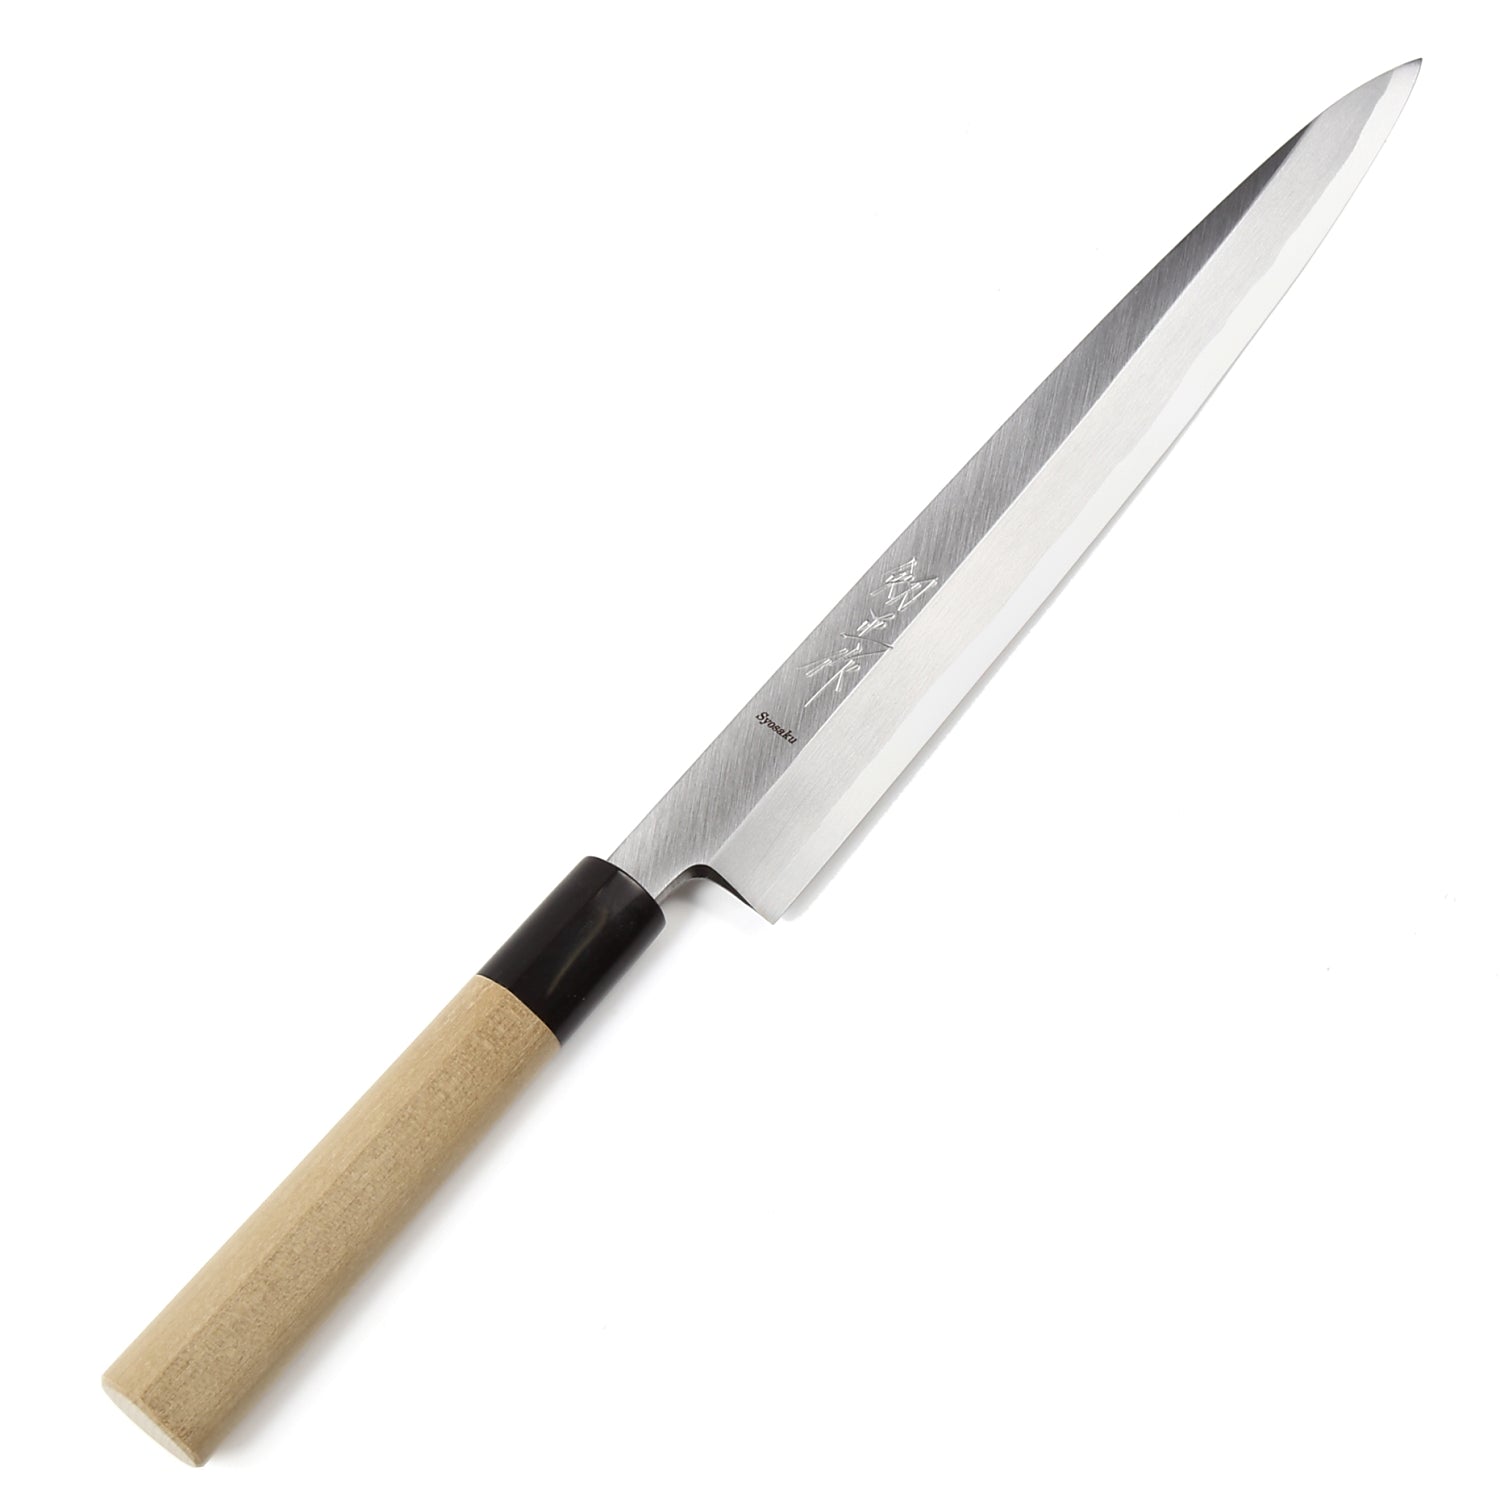 So, which sashimi(sushi) knife is the best?